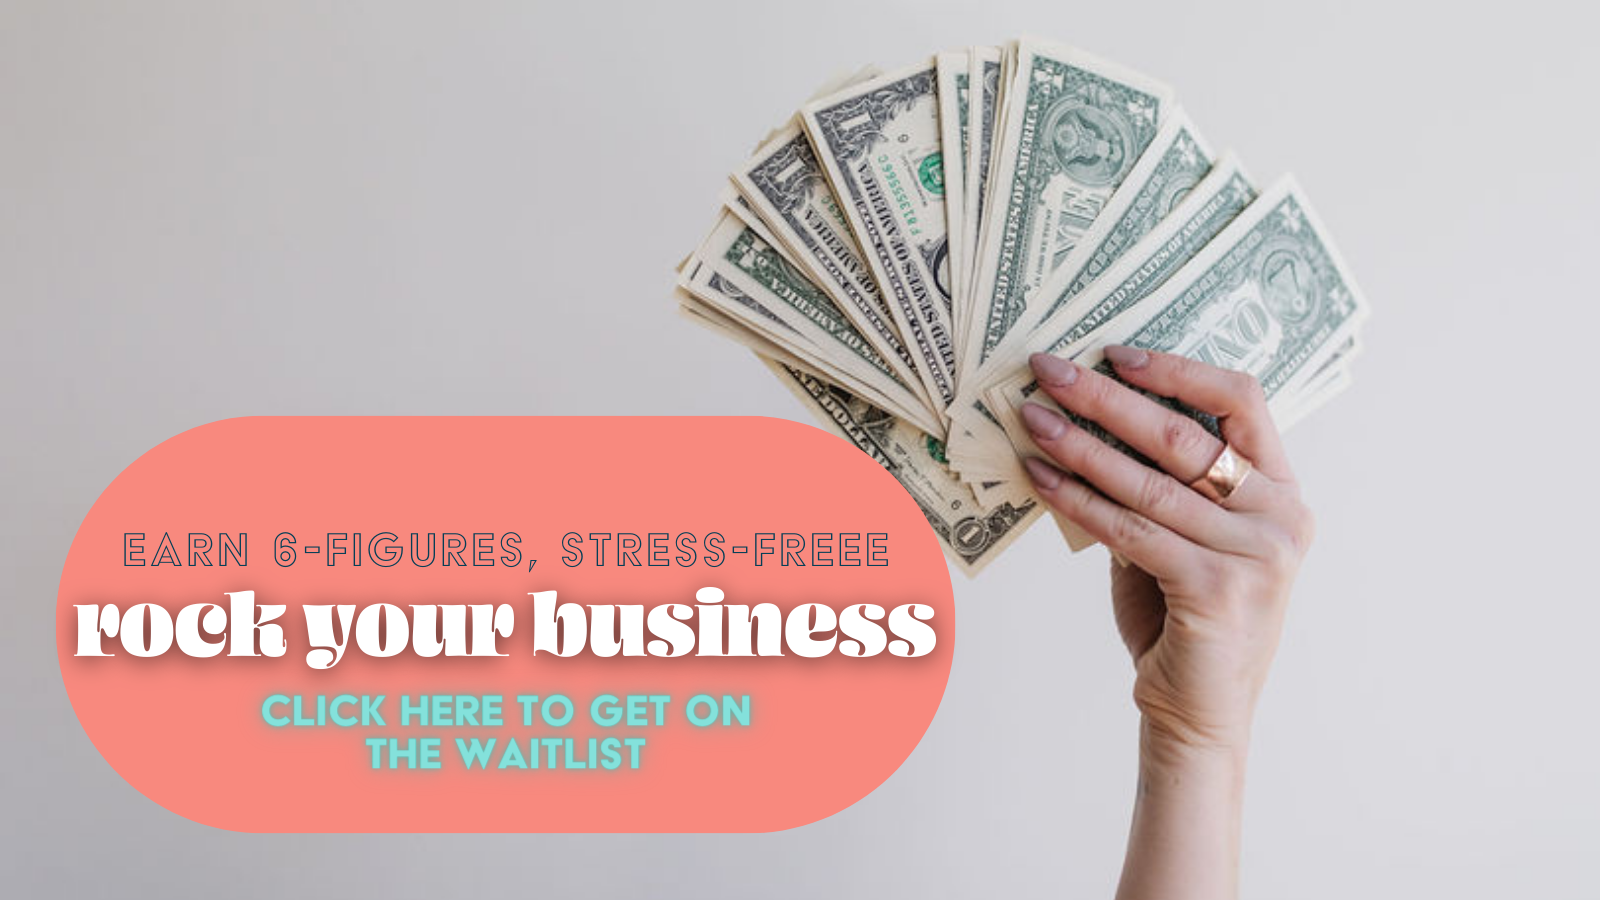 a disembodied hand with rose pink nails and a rose gold ring holds a fanned-out stack of dollar bills, the text overlay reads "earn 6-figures stress-free, rock your business, click here to get on the waitlist"